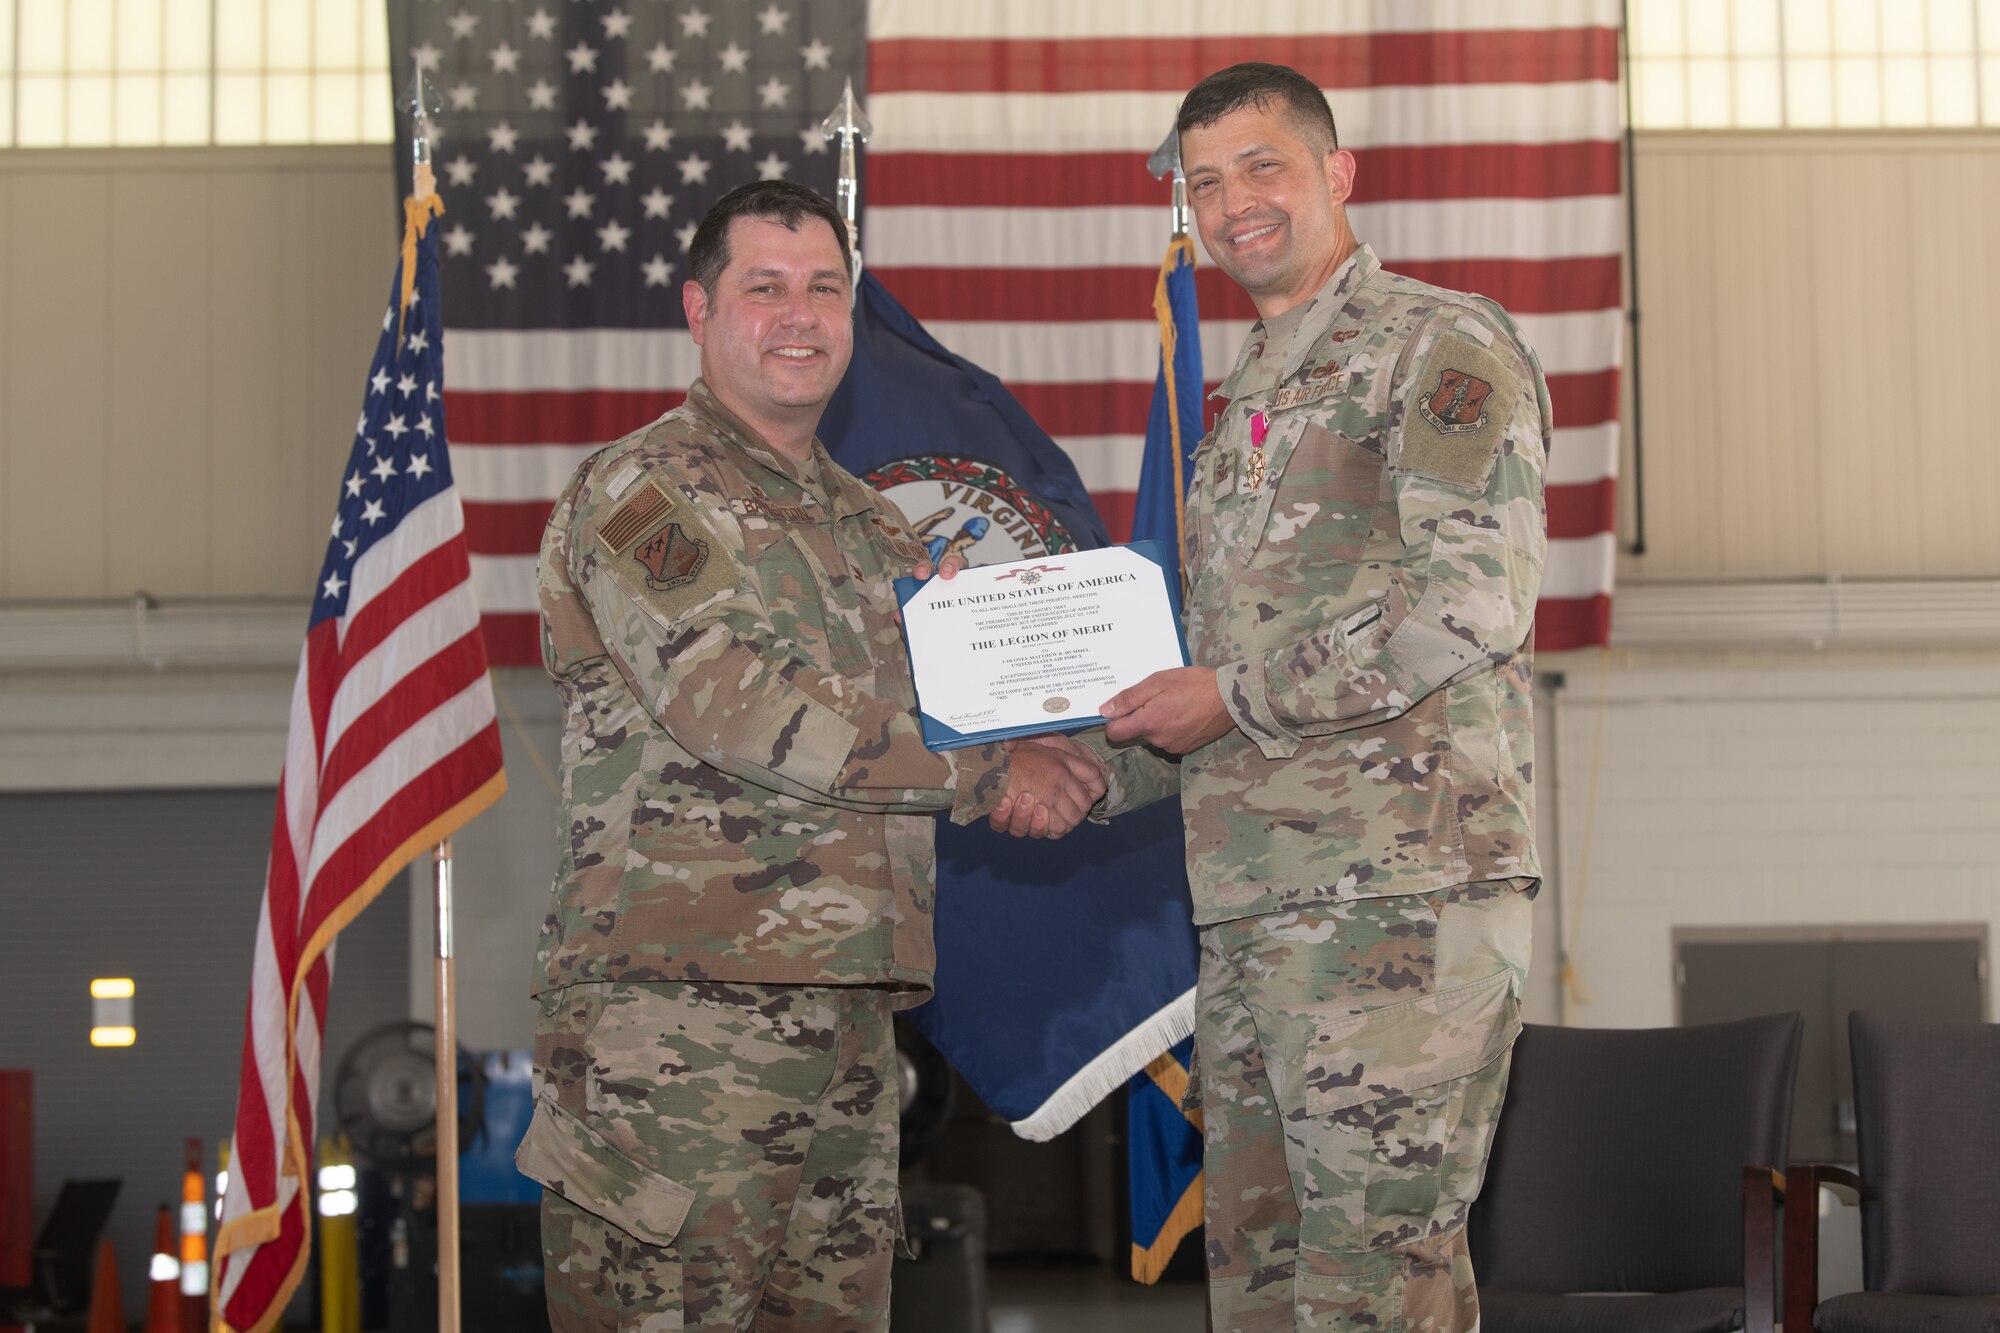 Col. Chris Batterton and Col. Matthew Hummel pose for a photo with award.